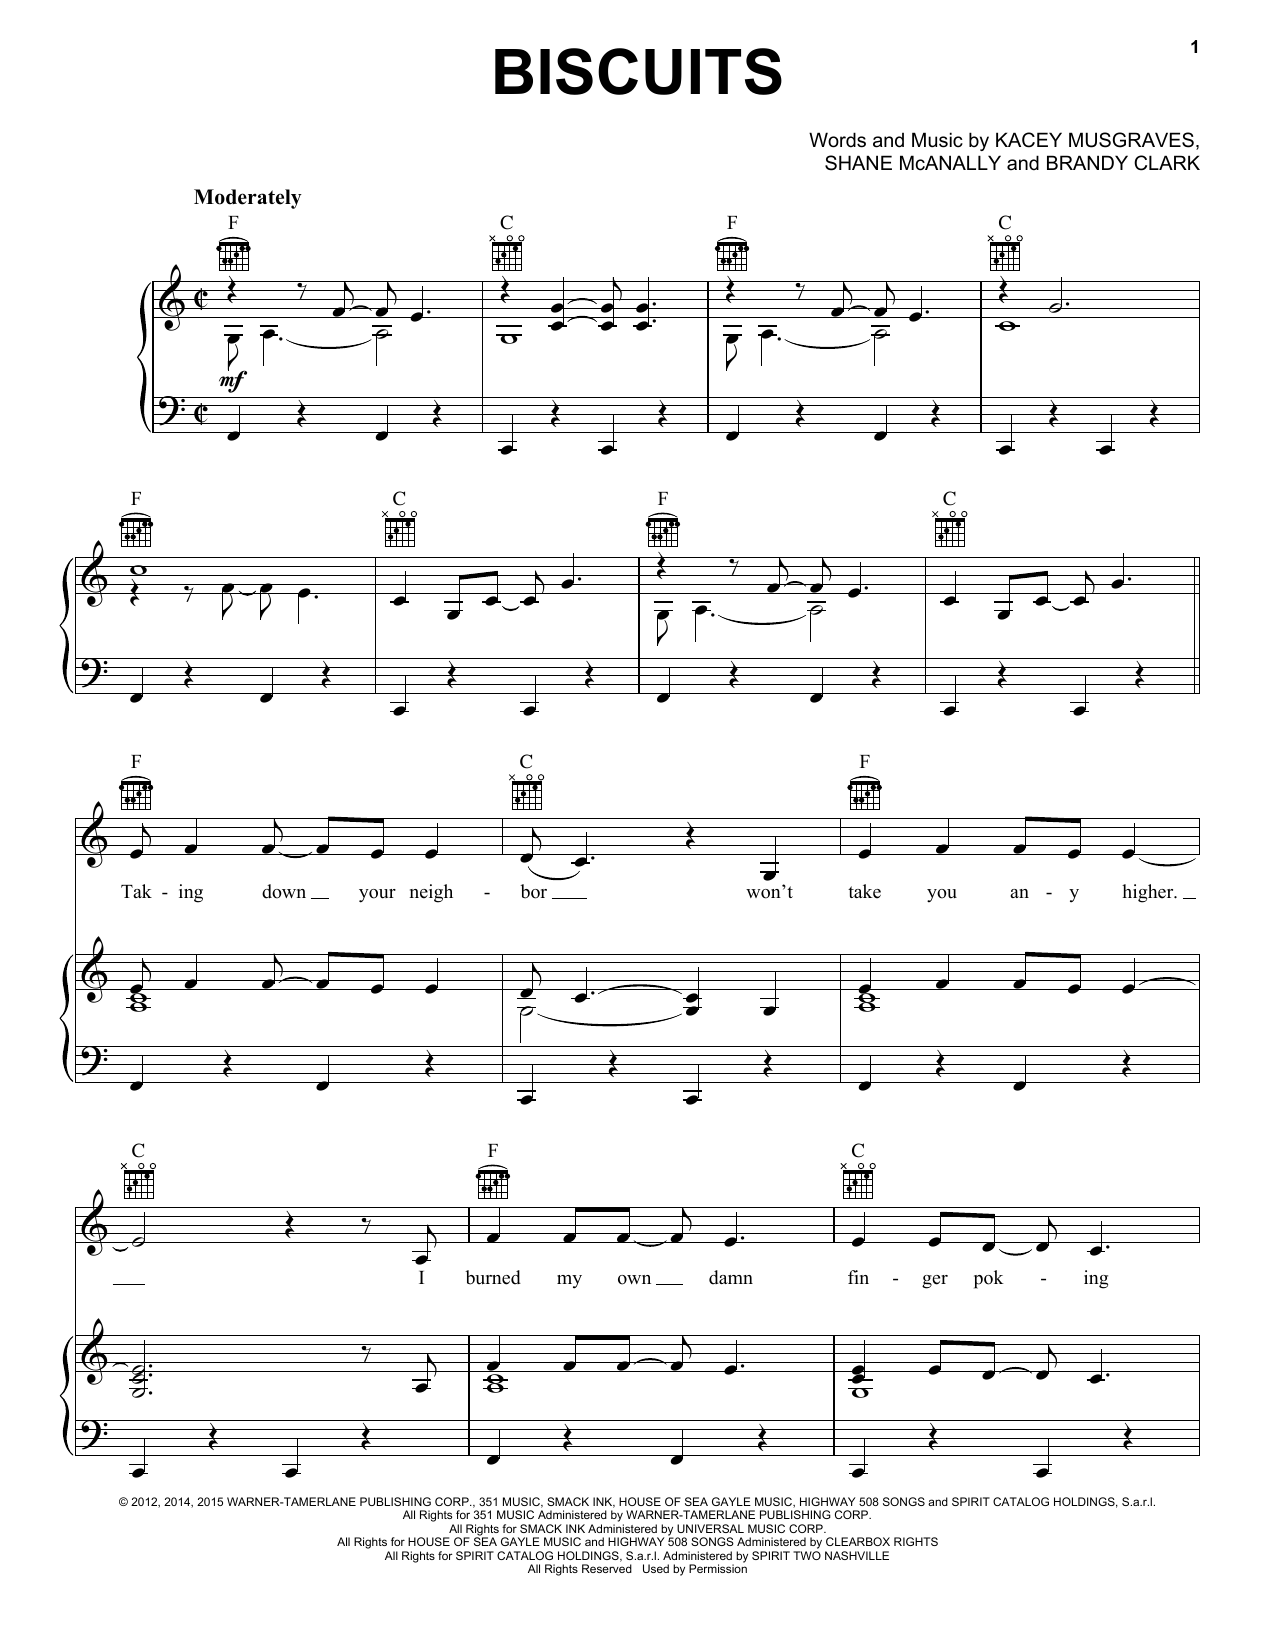 Download Kacey Musgraves Biscuits Sheet Music